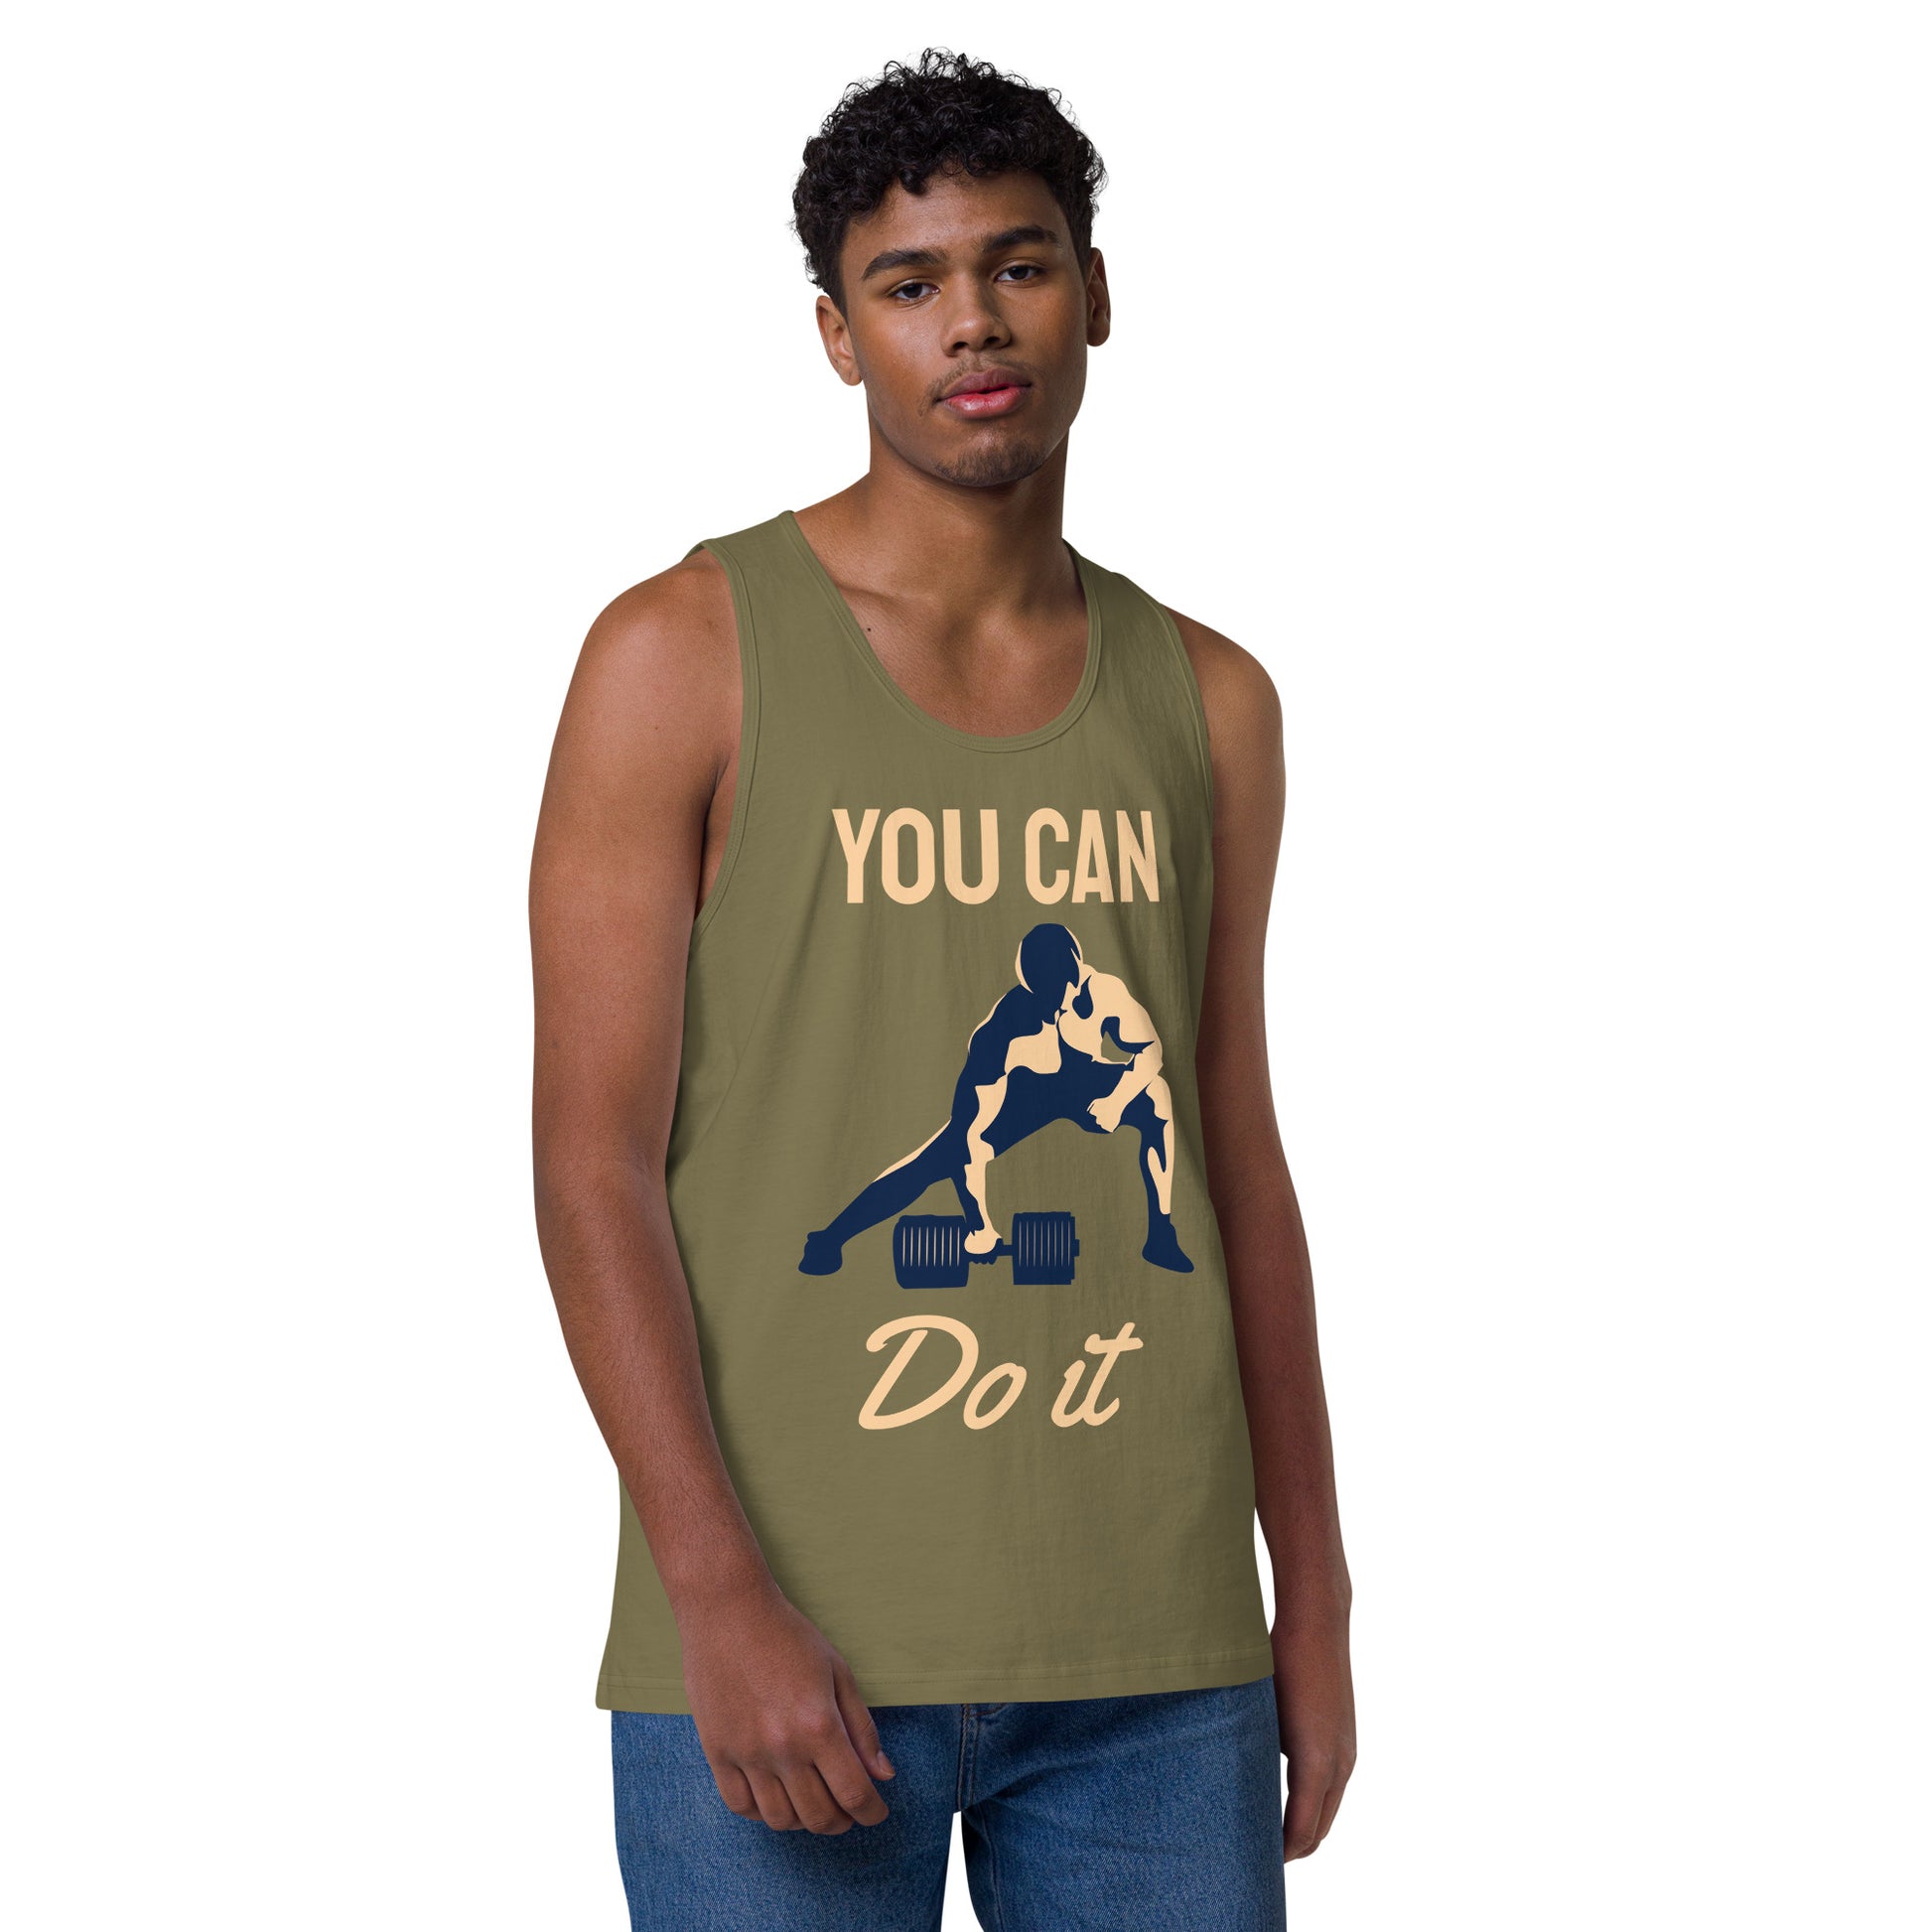 You can do it premium tank top - Military Green / S - Sport Finesse